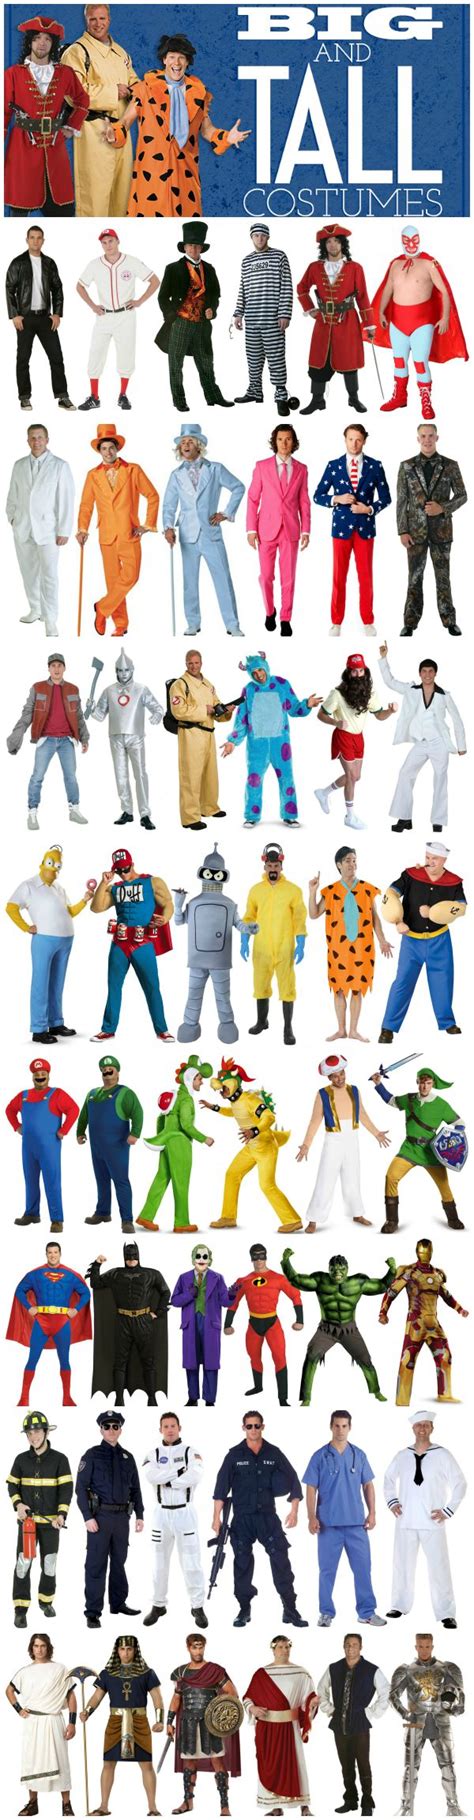 Costume Ideas For Tall People Costume Guide